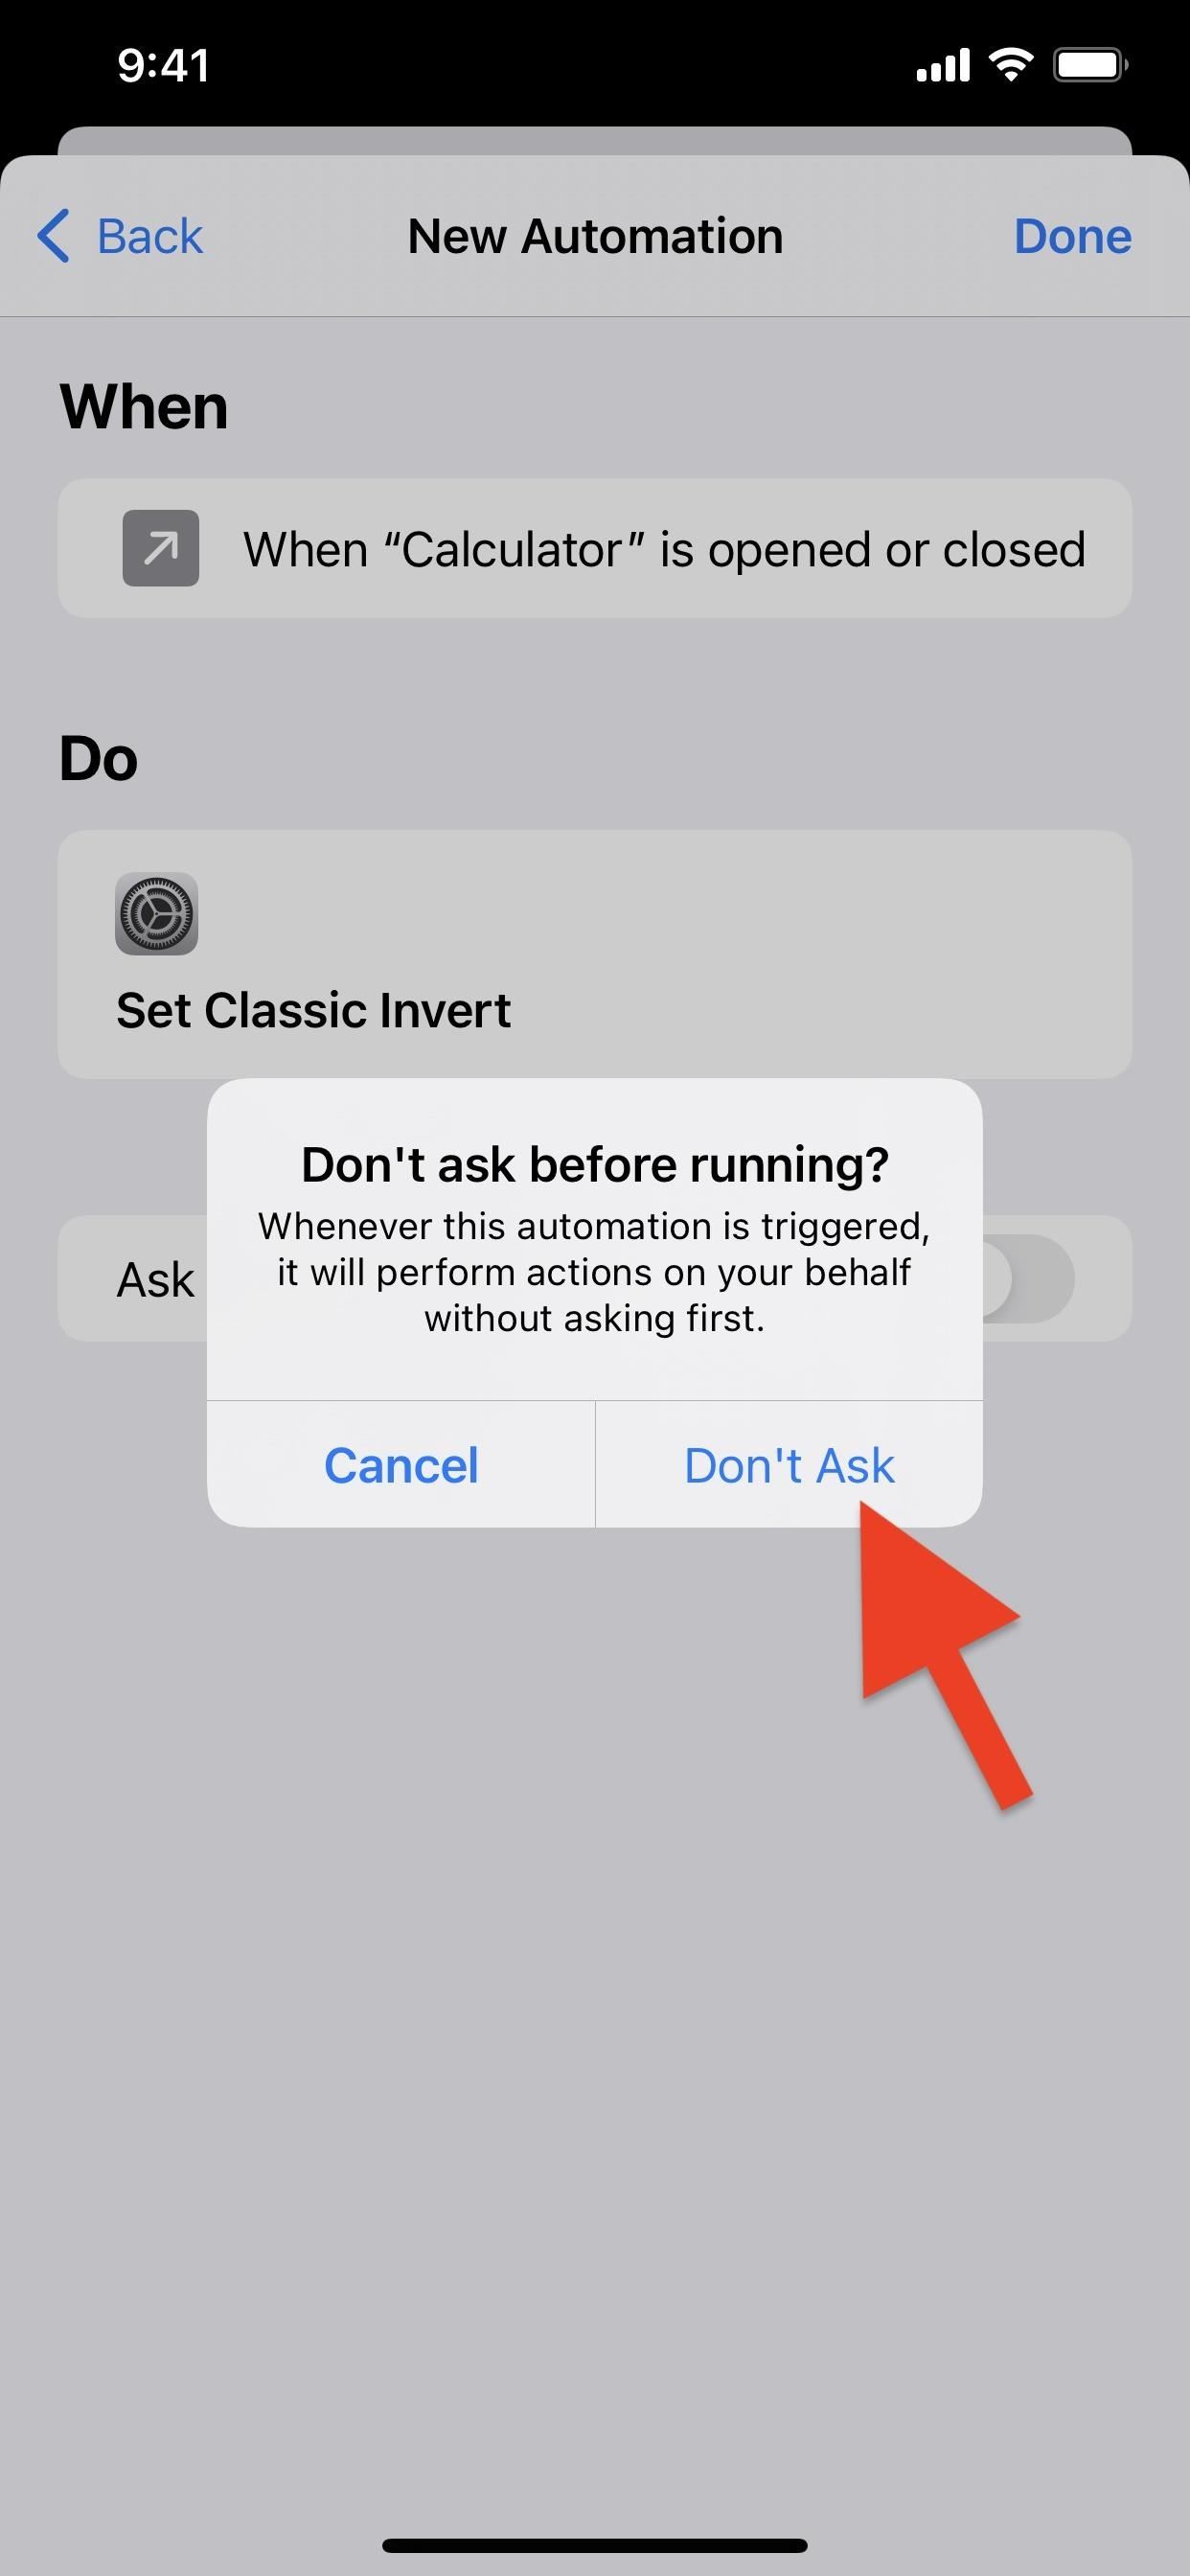 How to Change the Color Theme of Any App Interface on Your iPhone — Without Affecting the Rest of iOS